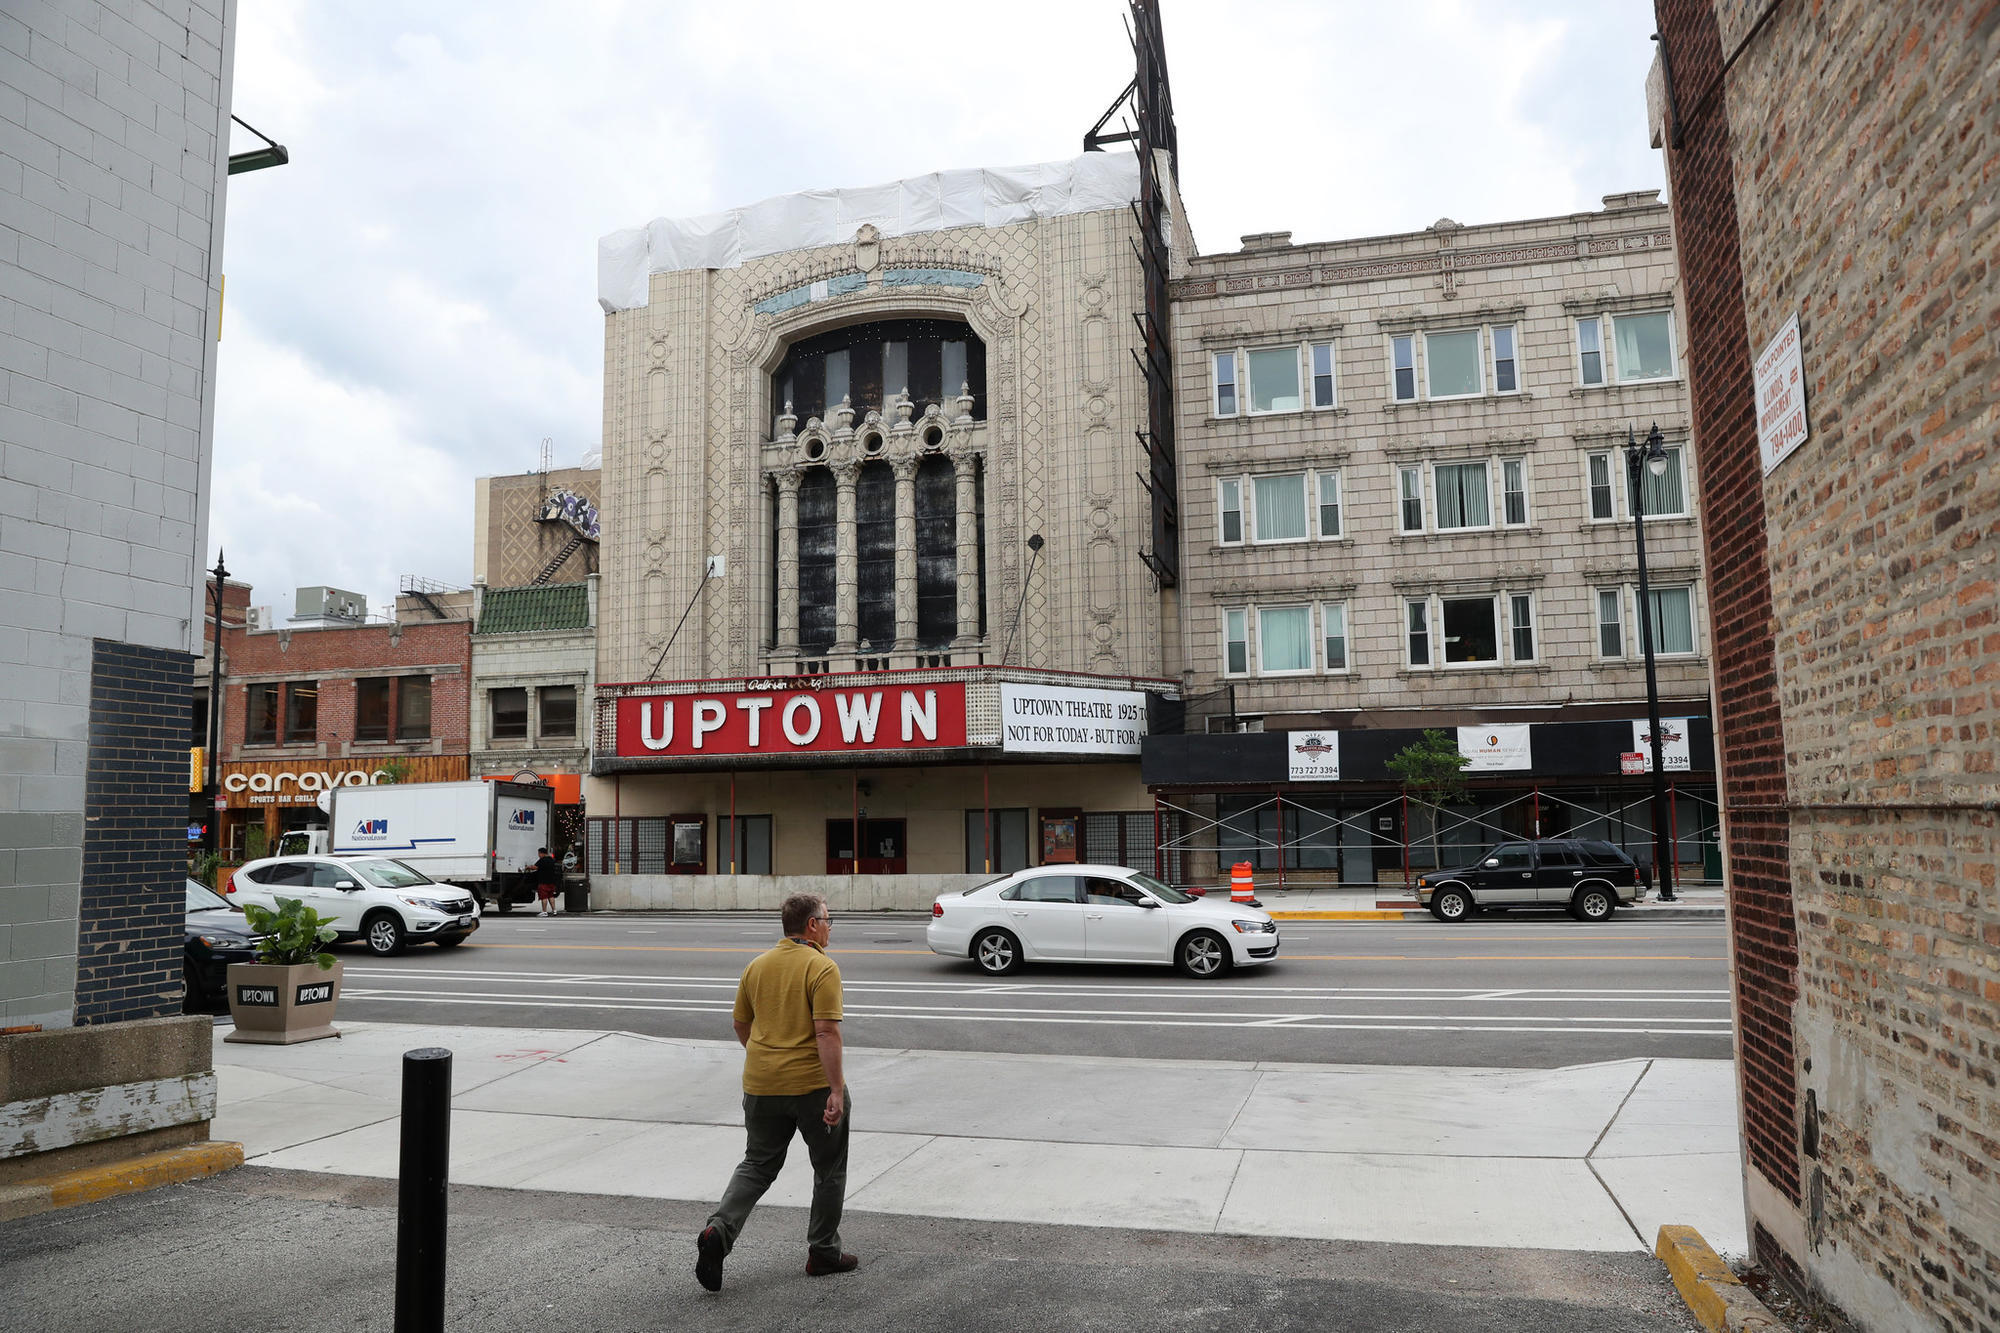 Uptown Theatre will be restored: $75 million plan unveiled for grand palace on North ...2000 x 1333